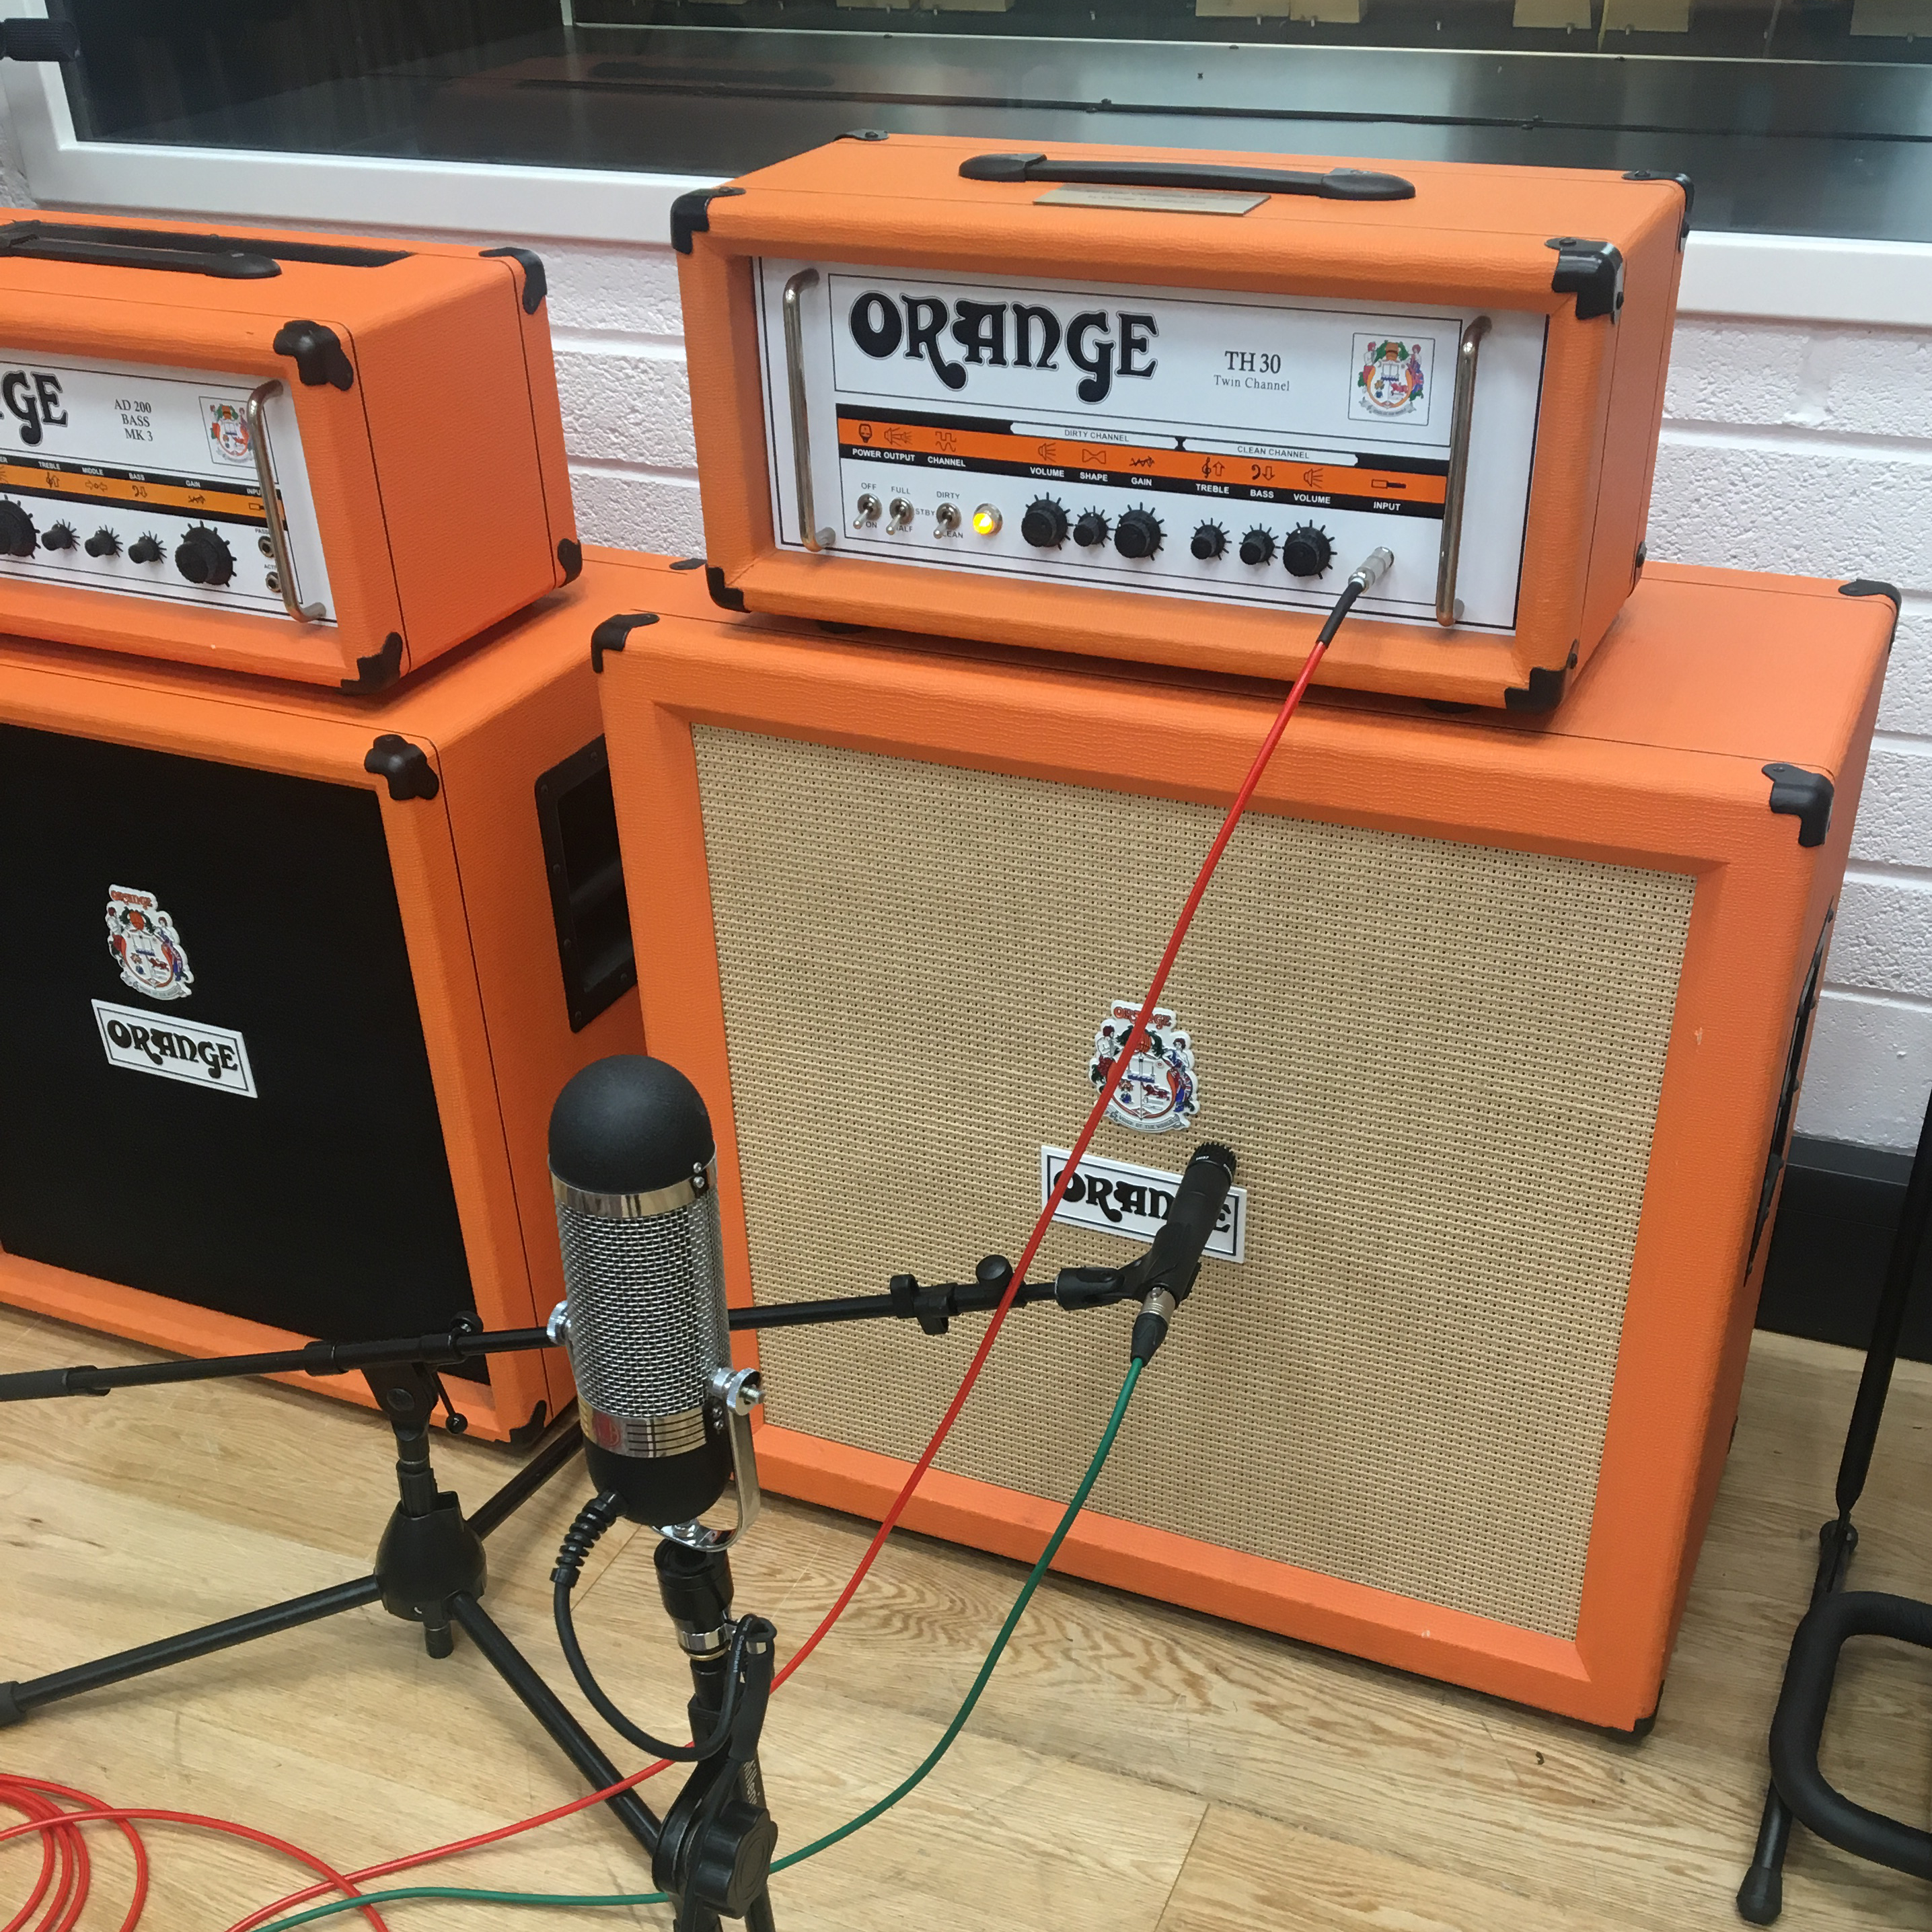 The bass was recorded back through Orange amps